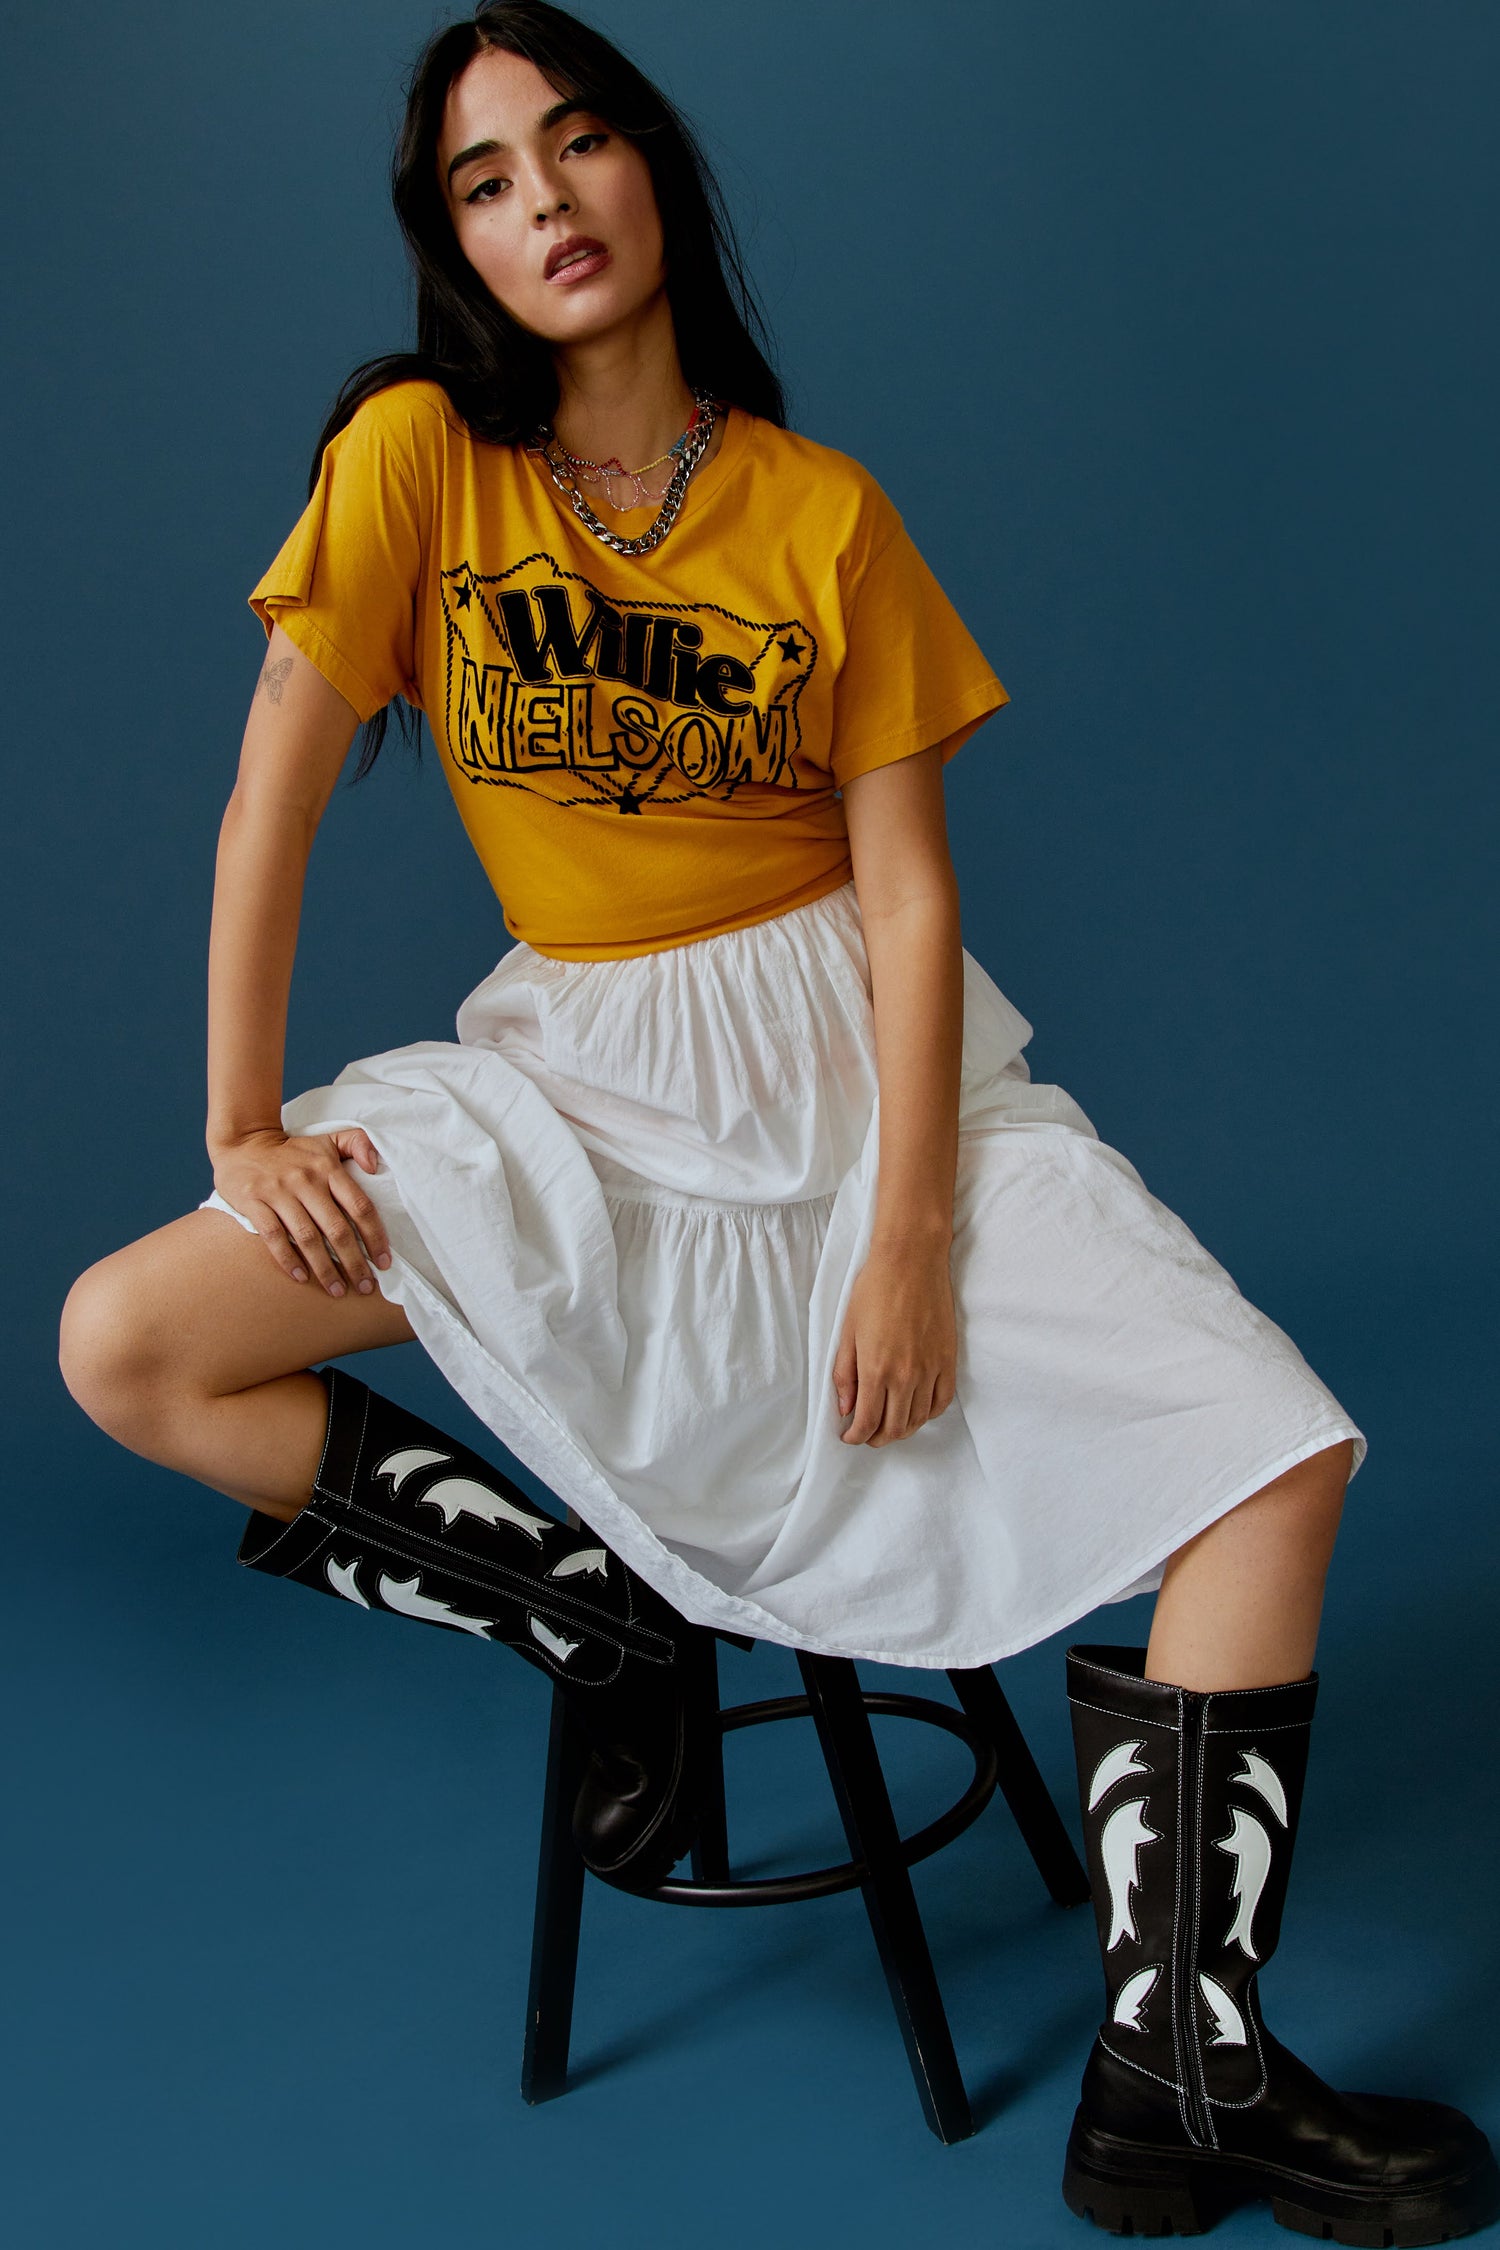 A dark-haired model featuring a golden daze tee stamped with 'Willie Nelson' in front and 'Genuine Outlaw Music' at the back.